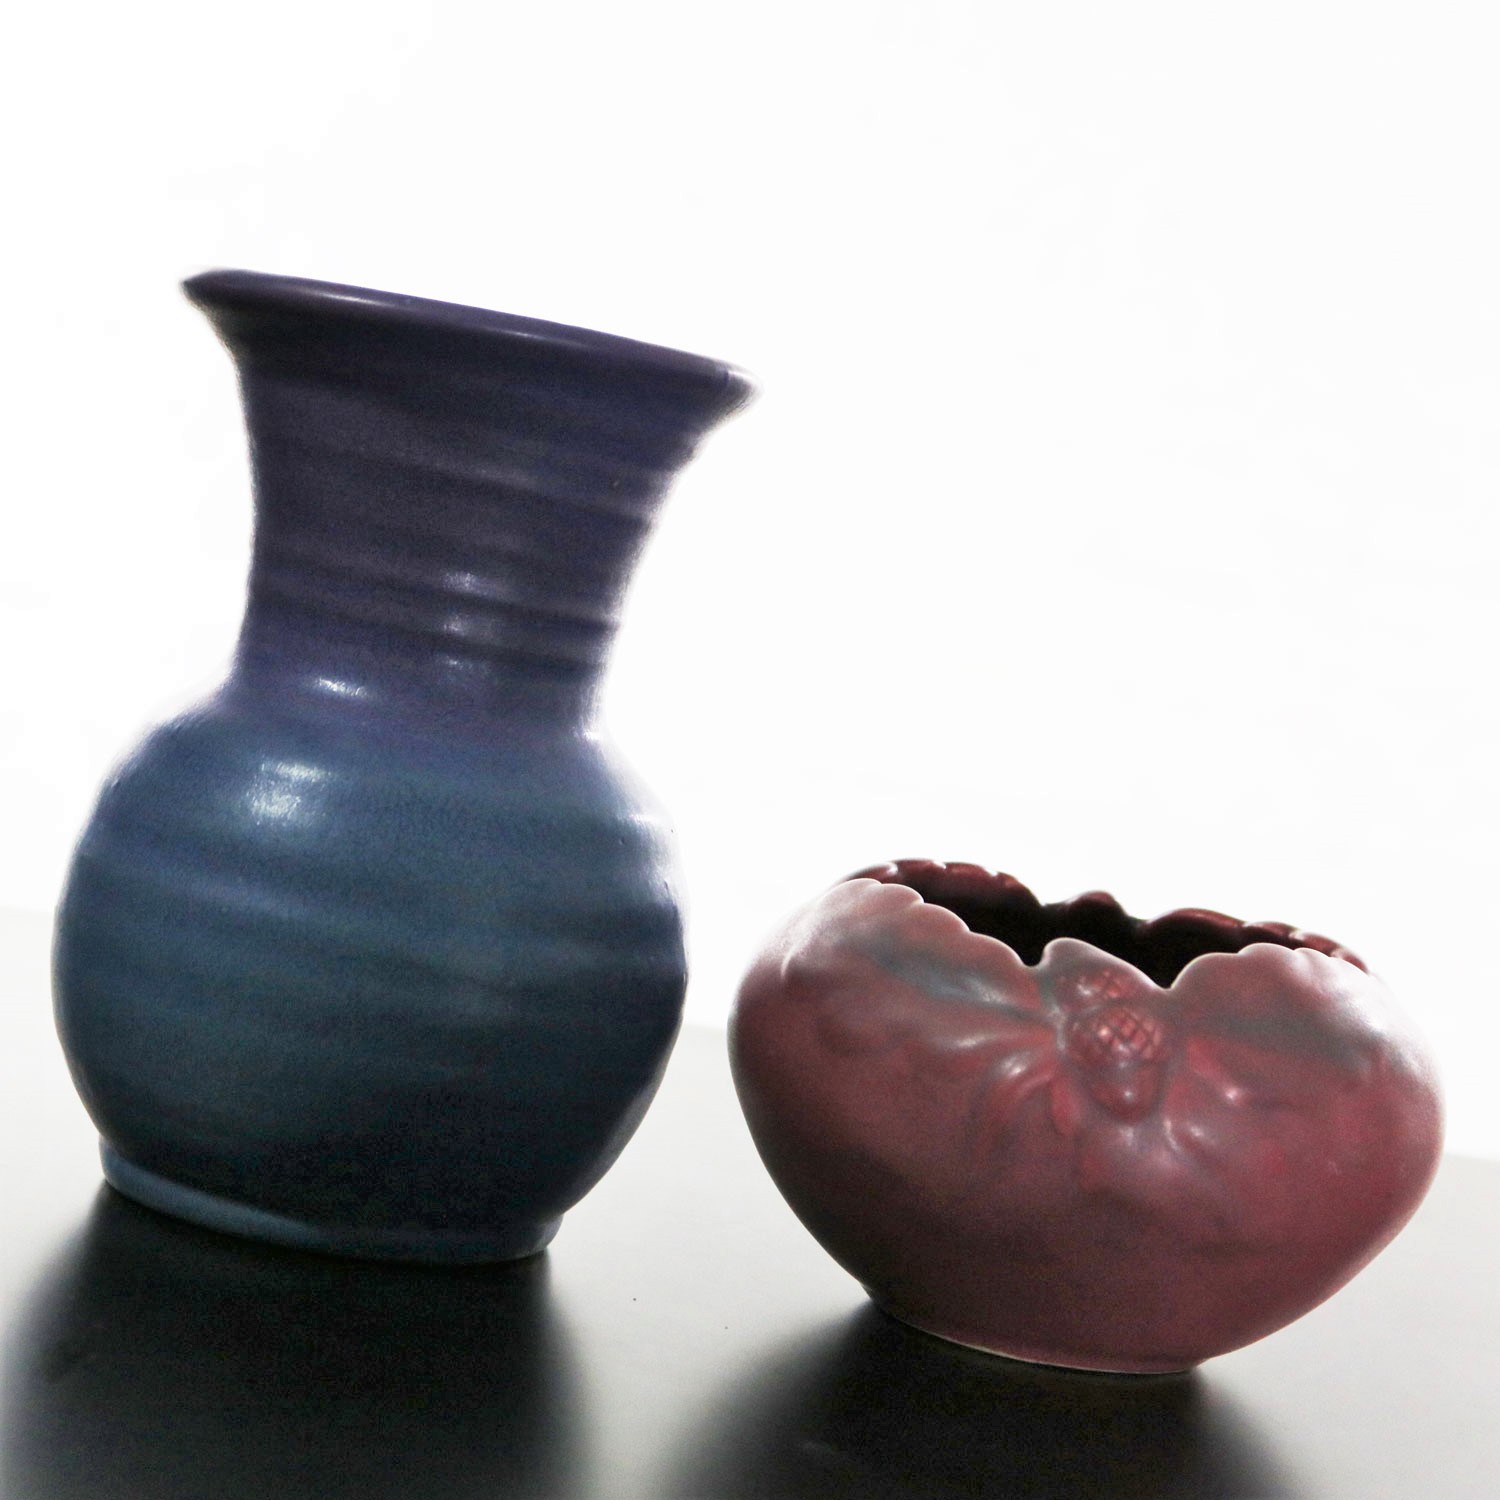 Pair of Van Briggle Pottery Pieces Persian Rose Bowl and Lilac Blue Vase